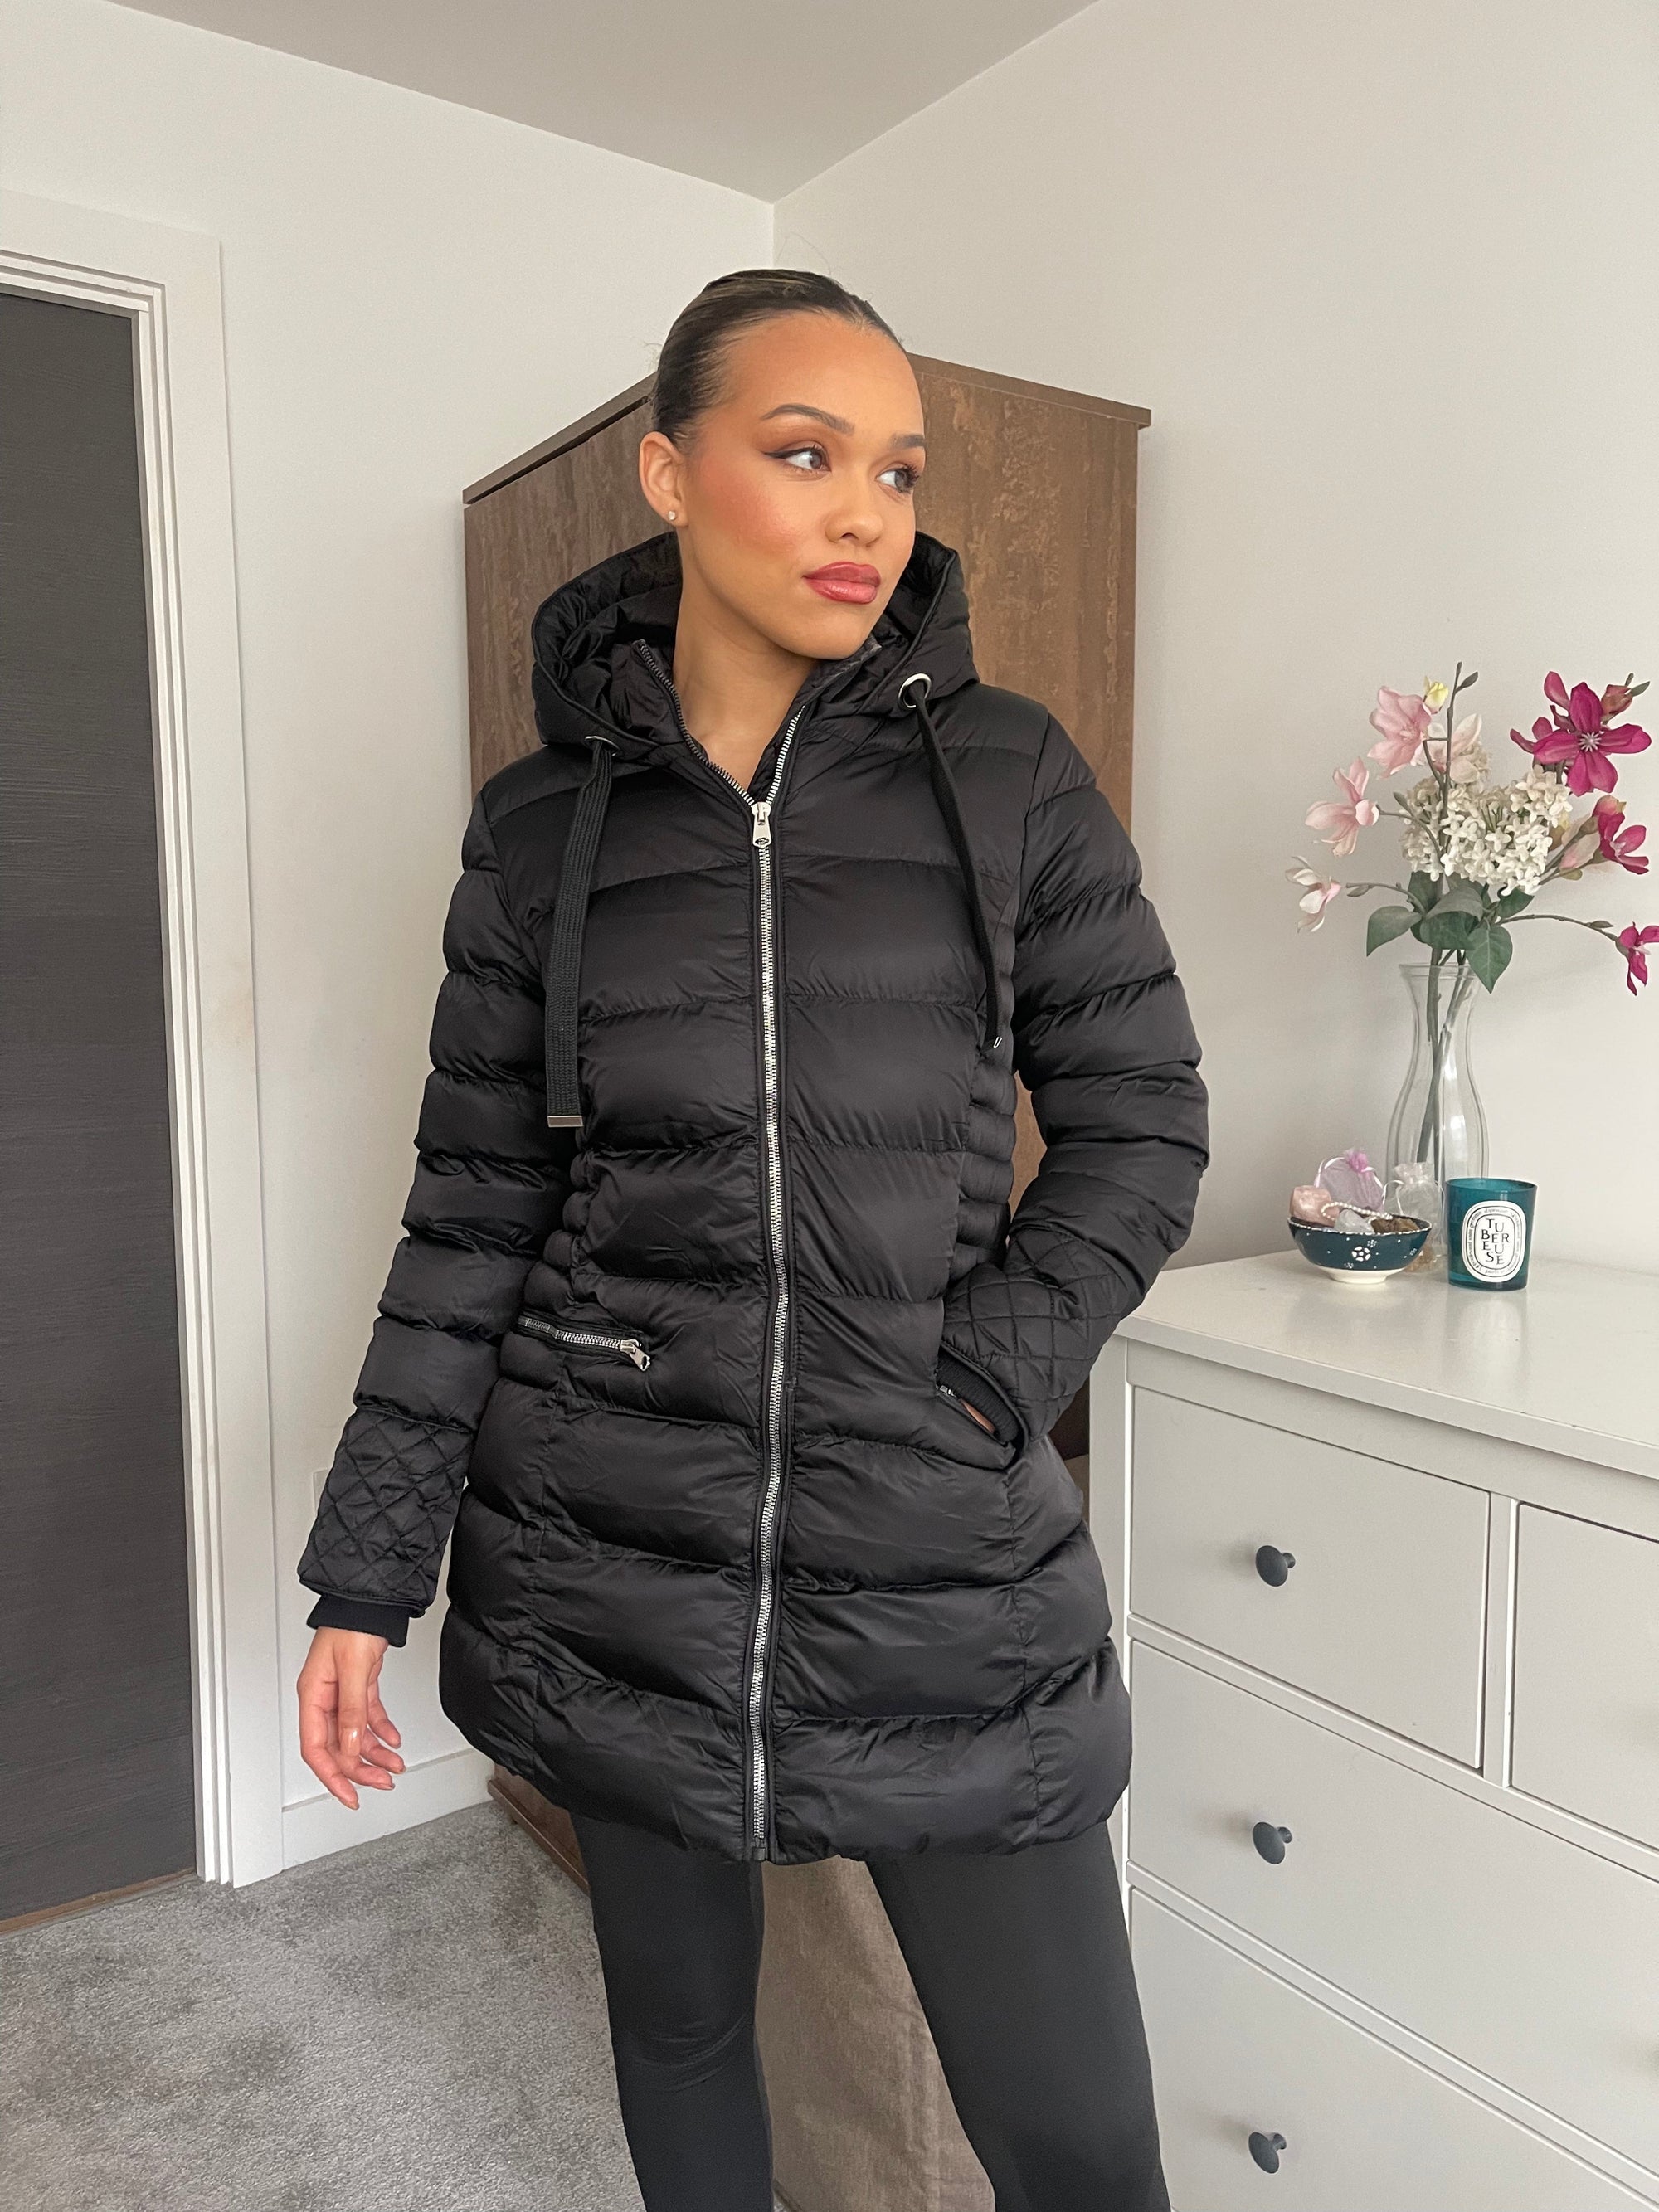 BLACK QUILTED ZIPPED HOODED JACKET